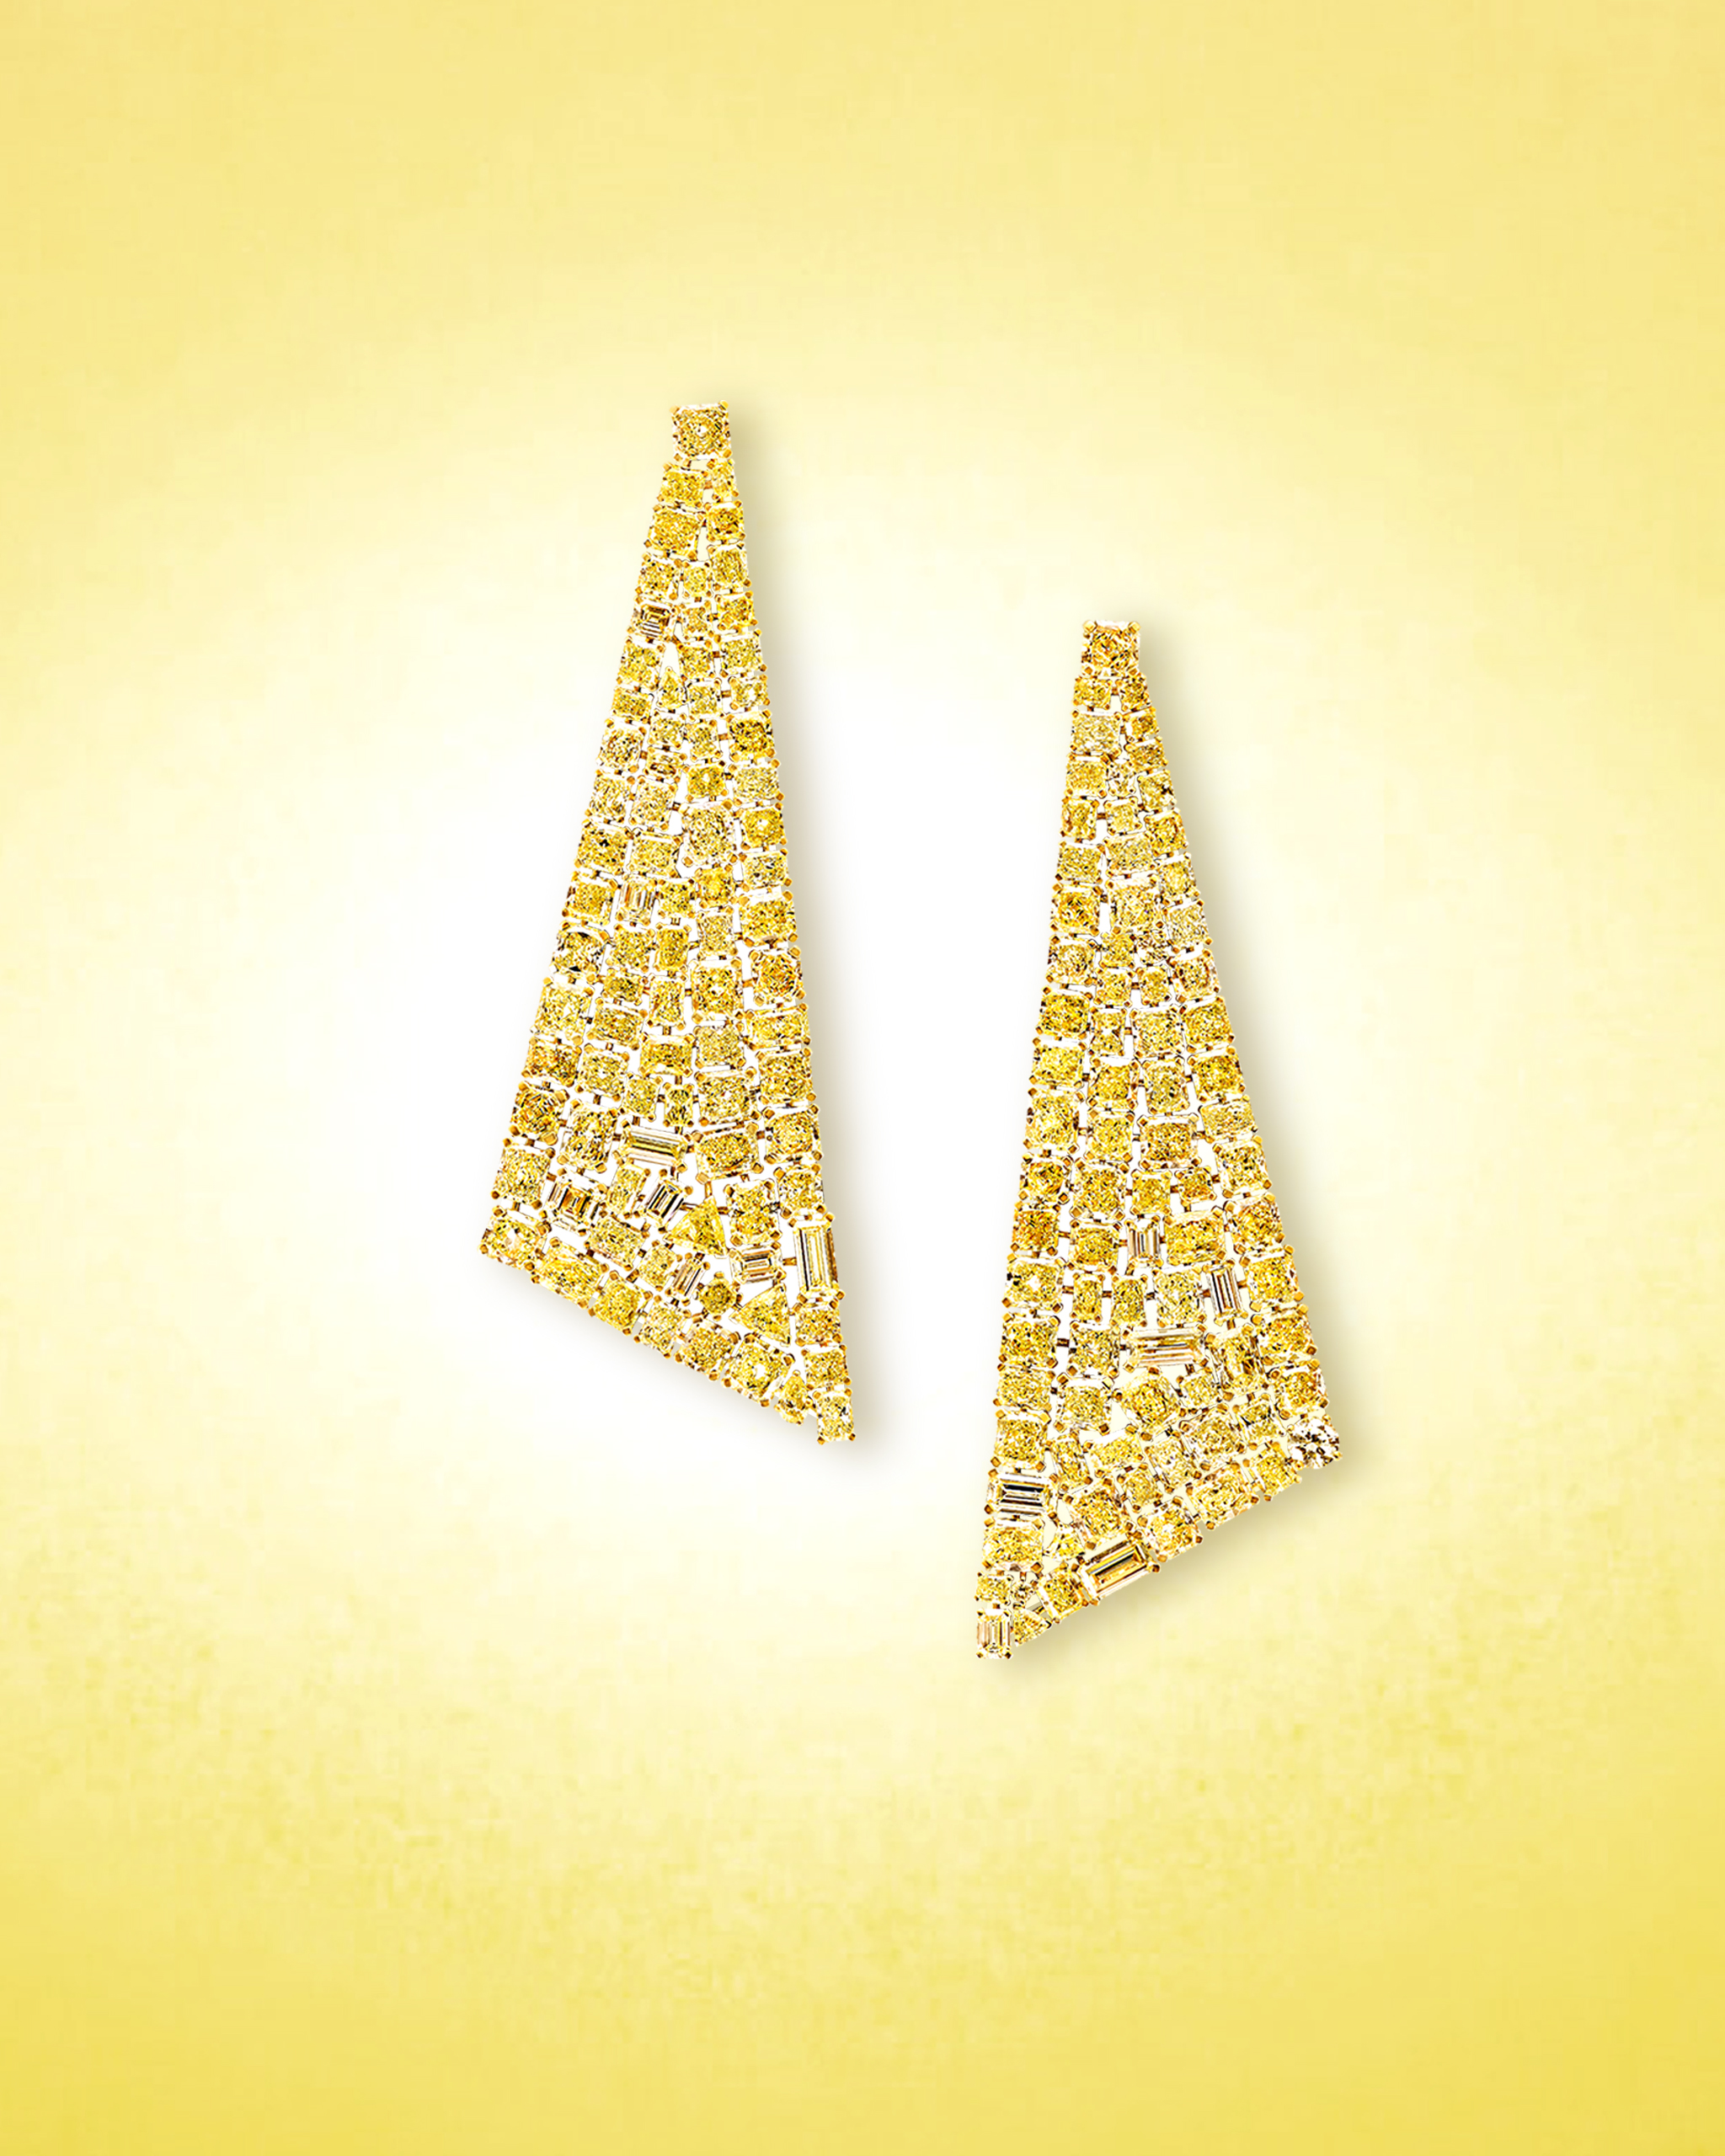 Assorted yellow diamond cuts and baguette diamonds set within statement earrings